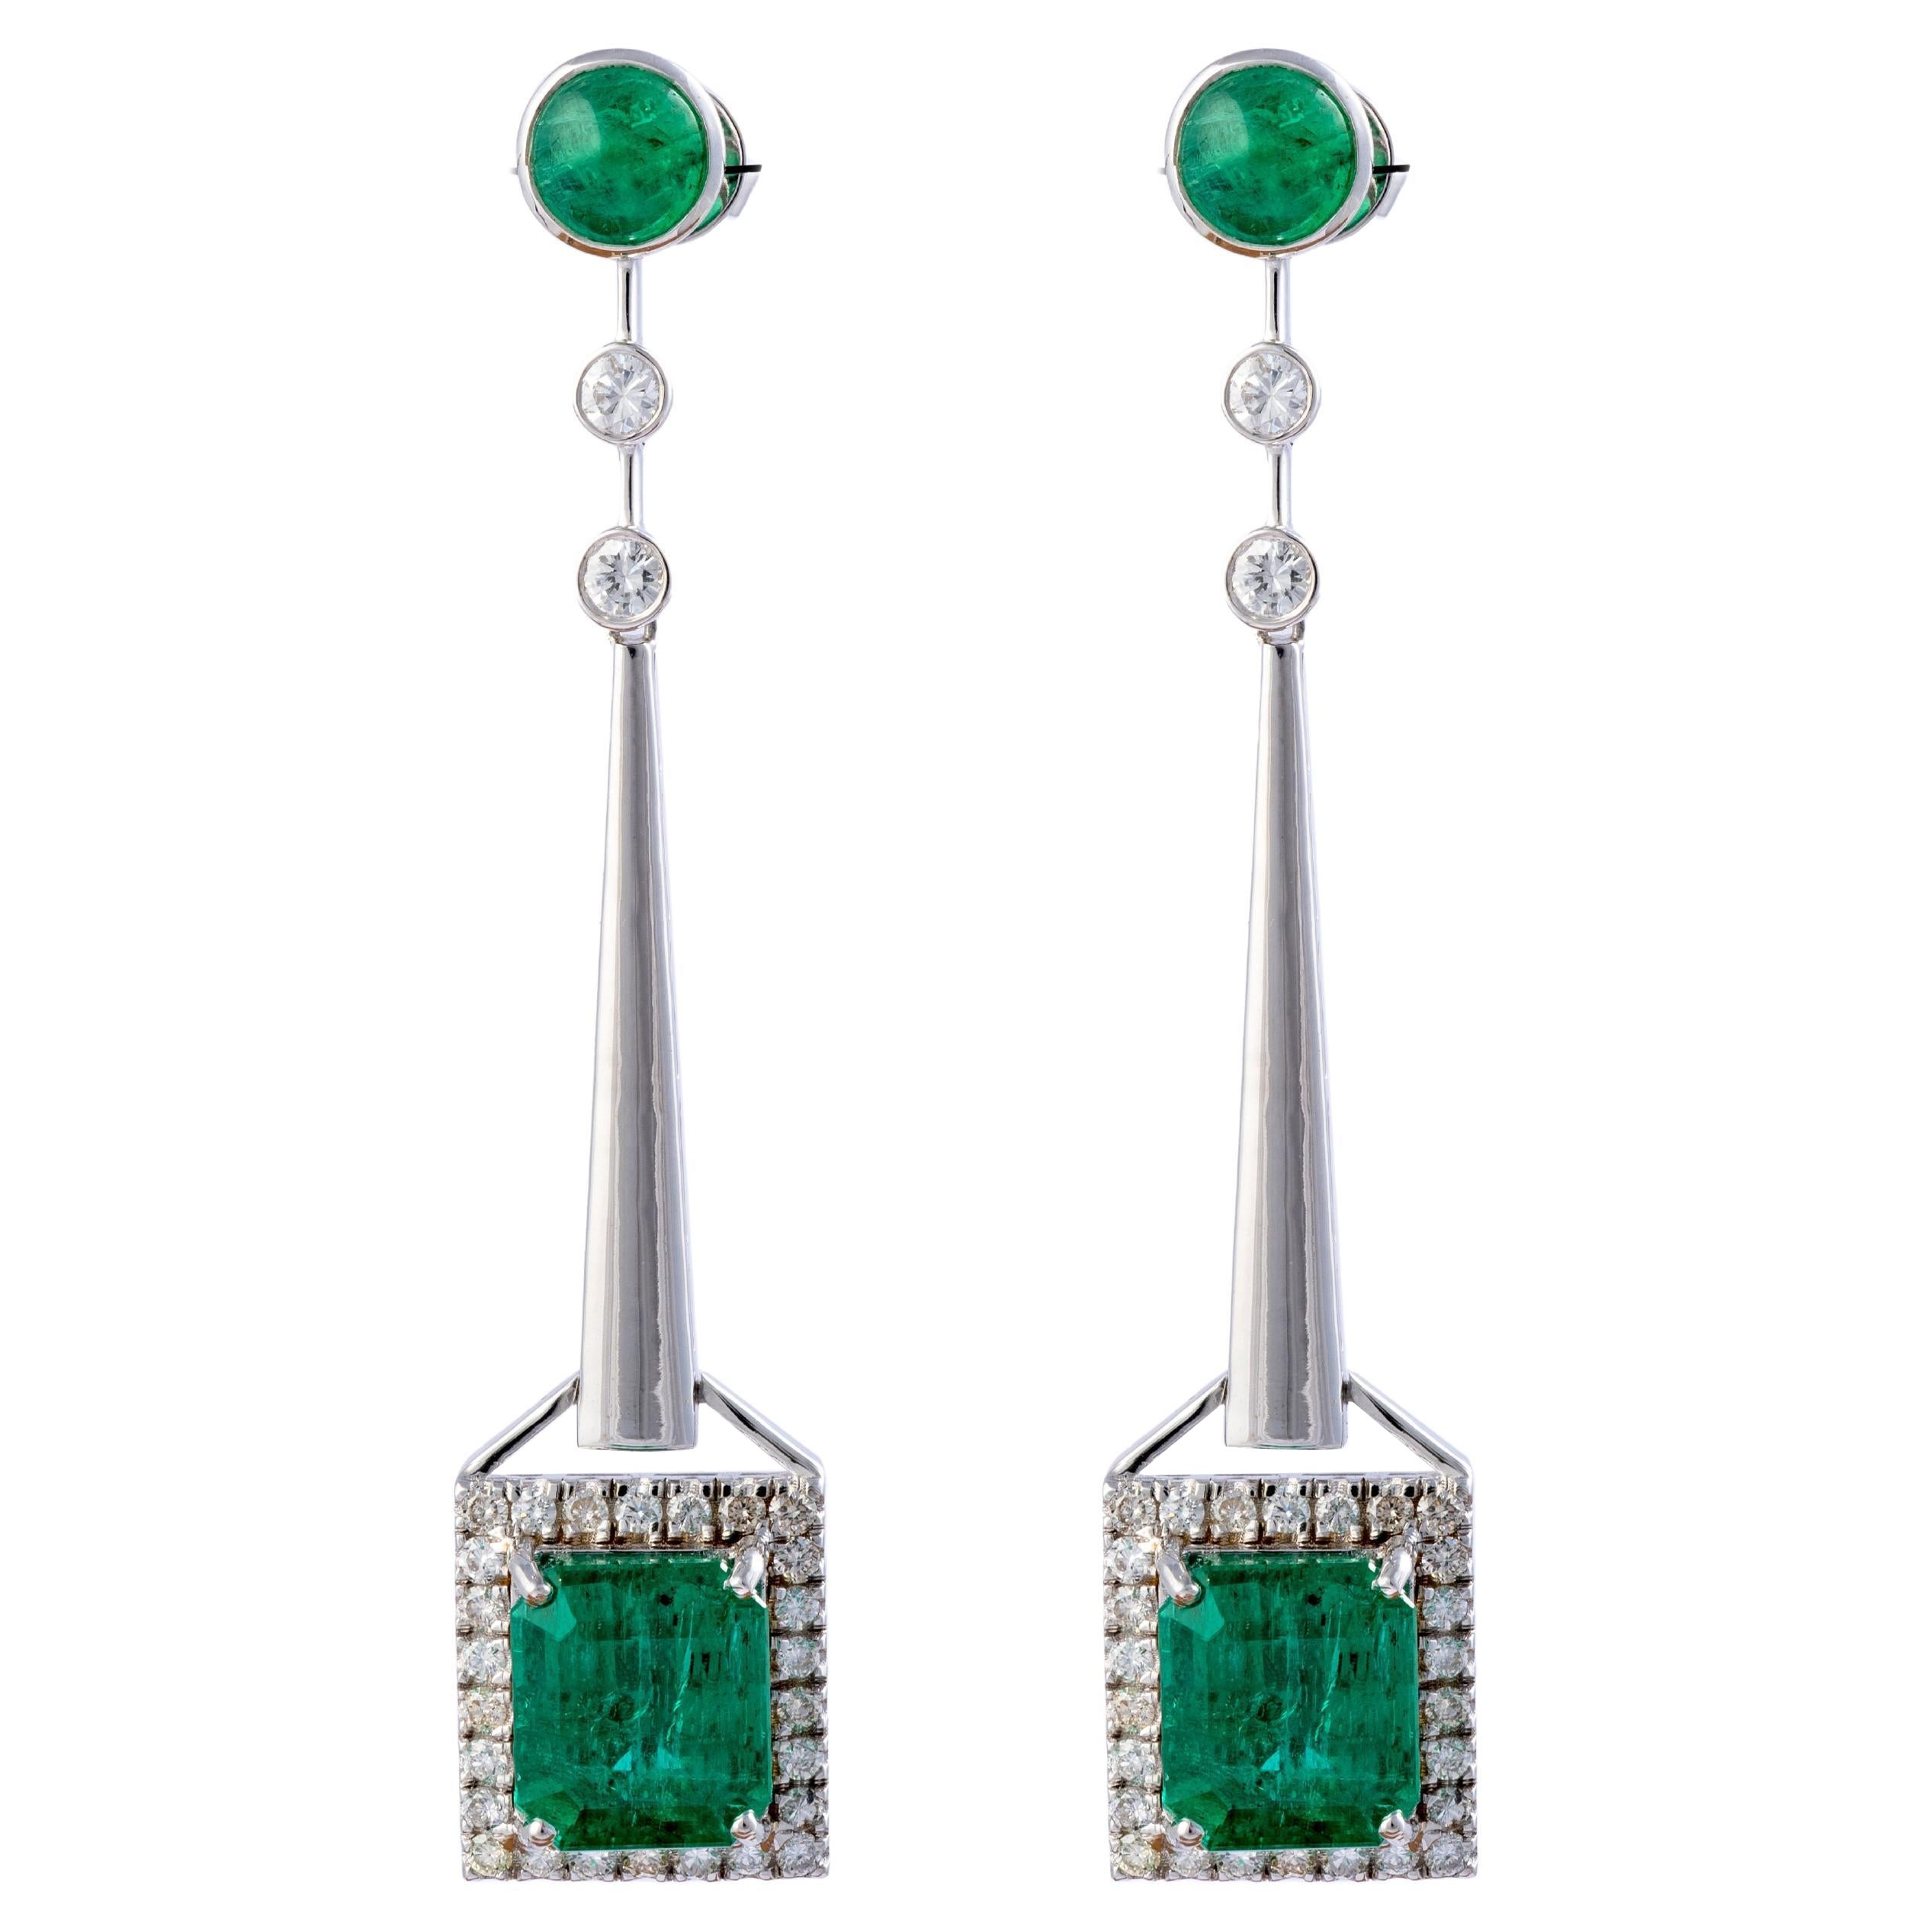 10.52 Carats Natural Zambian Emerald Earrings with 1.32 Diamonds and 14k Goldol